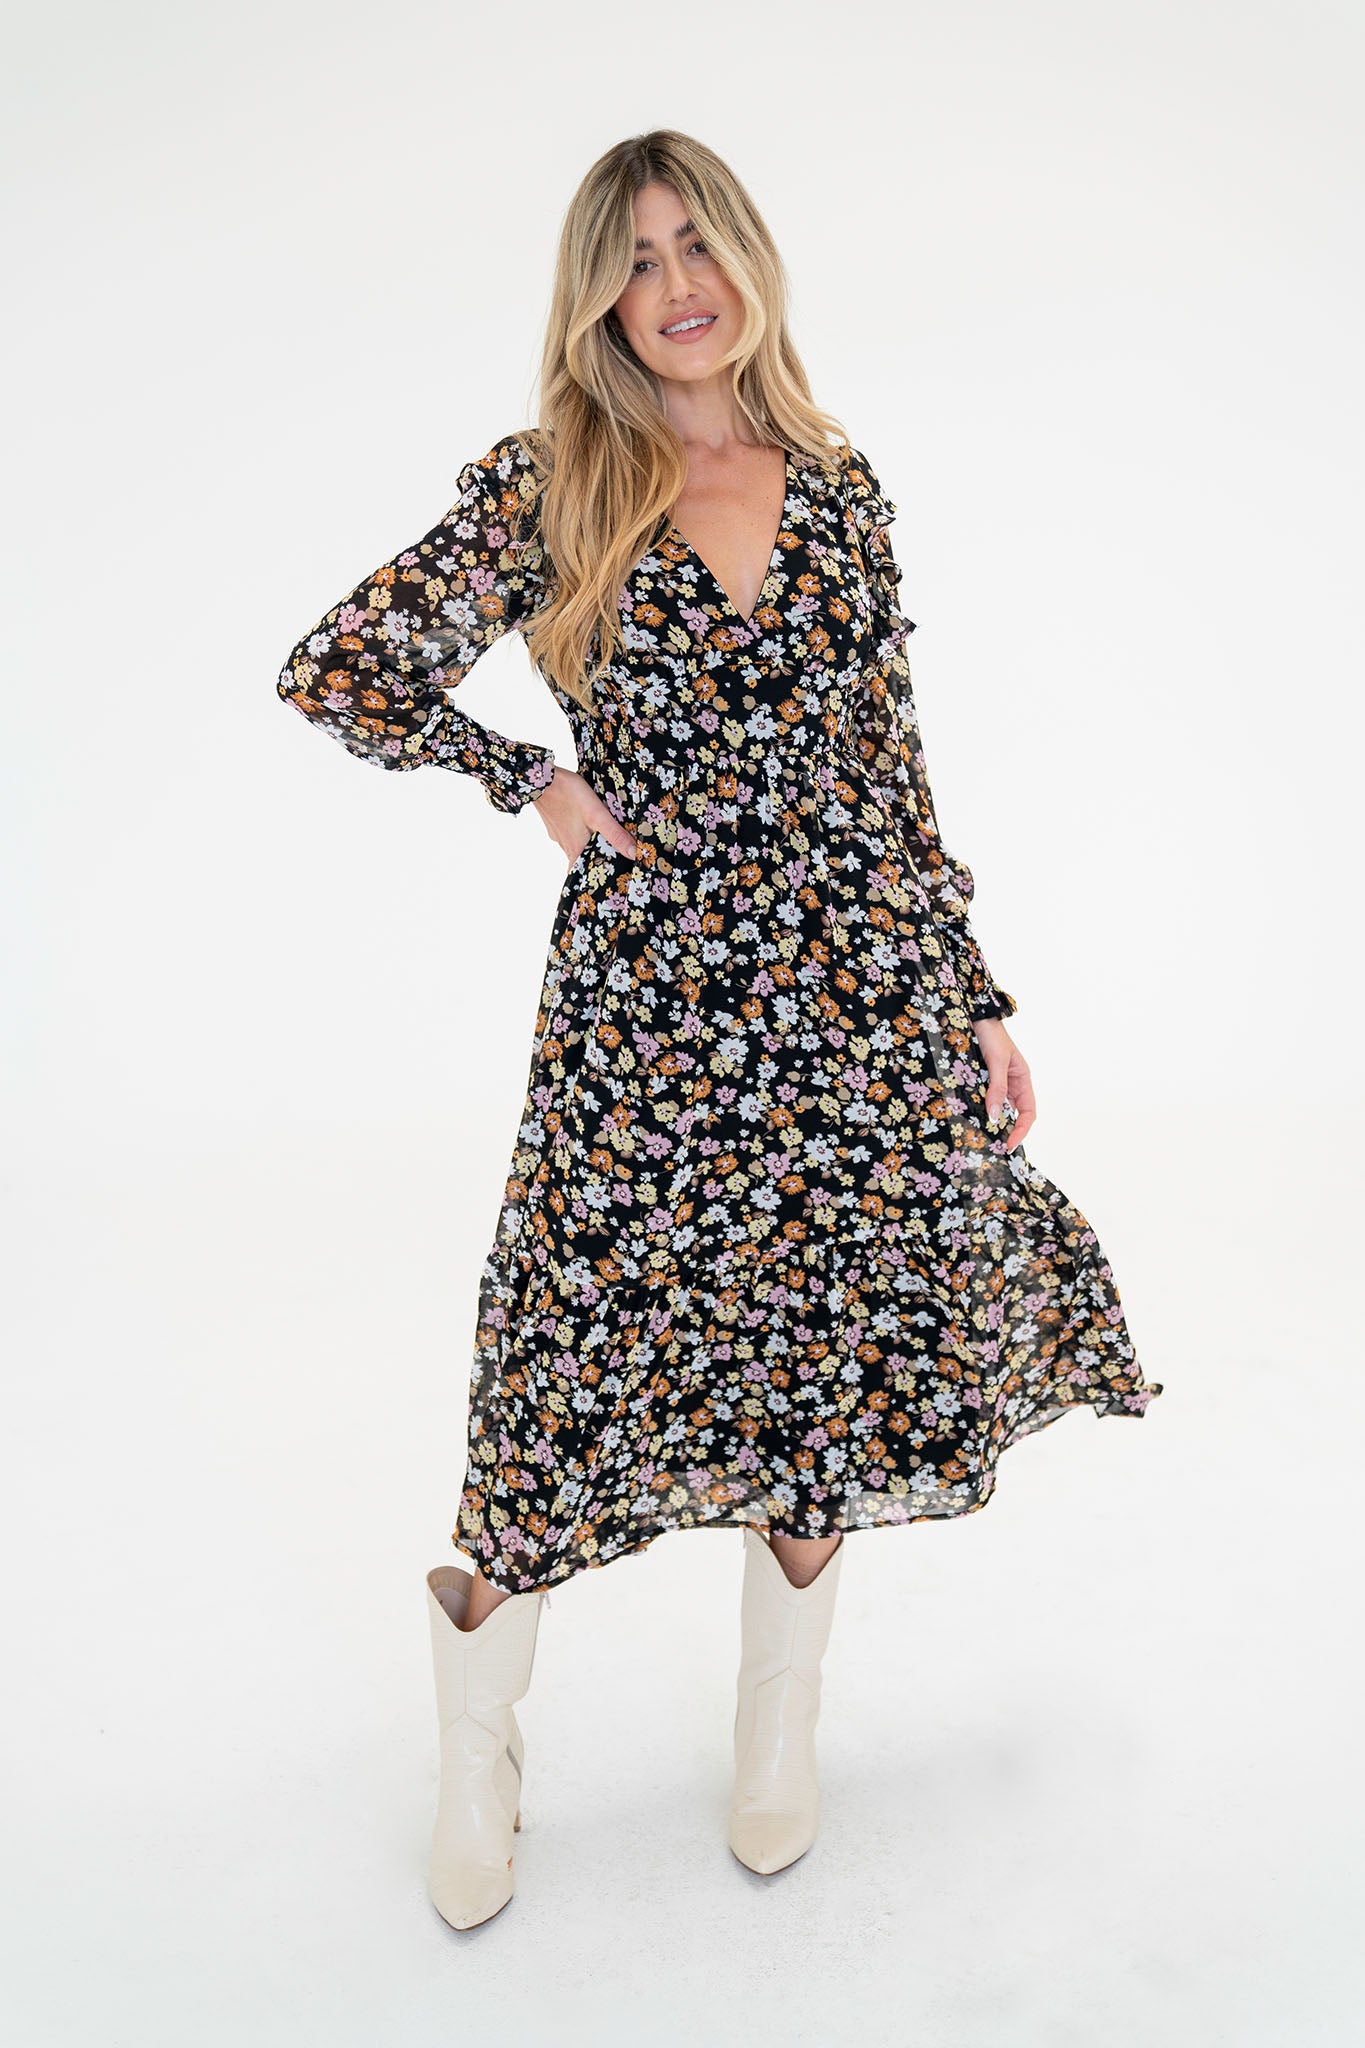 View 2 of Pansies Floral Midi Dress, a Dresses from Larrea Cove. Detail: .